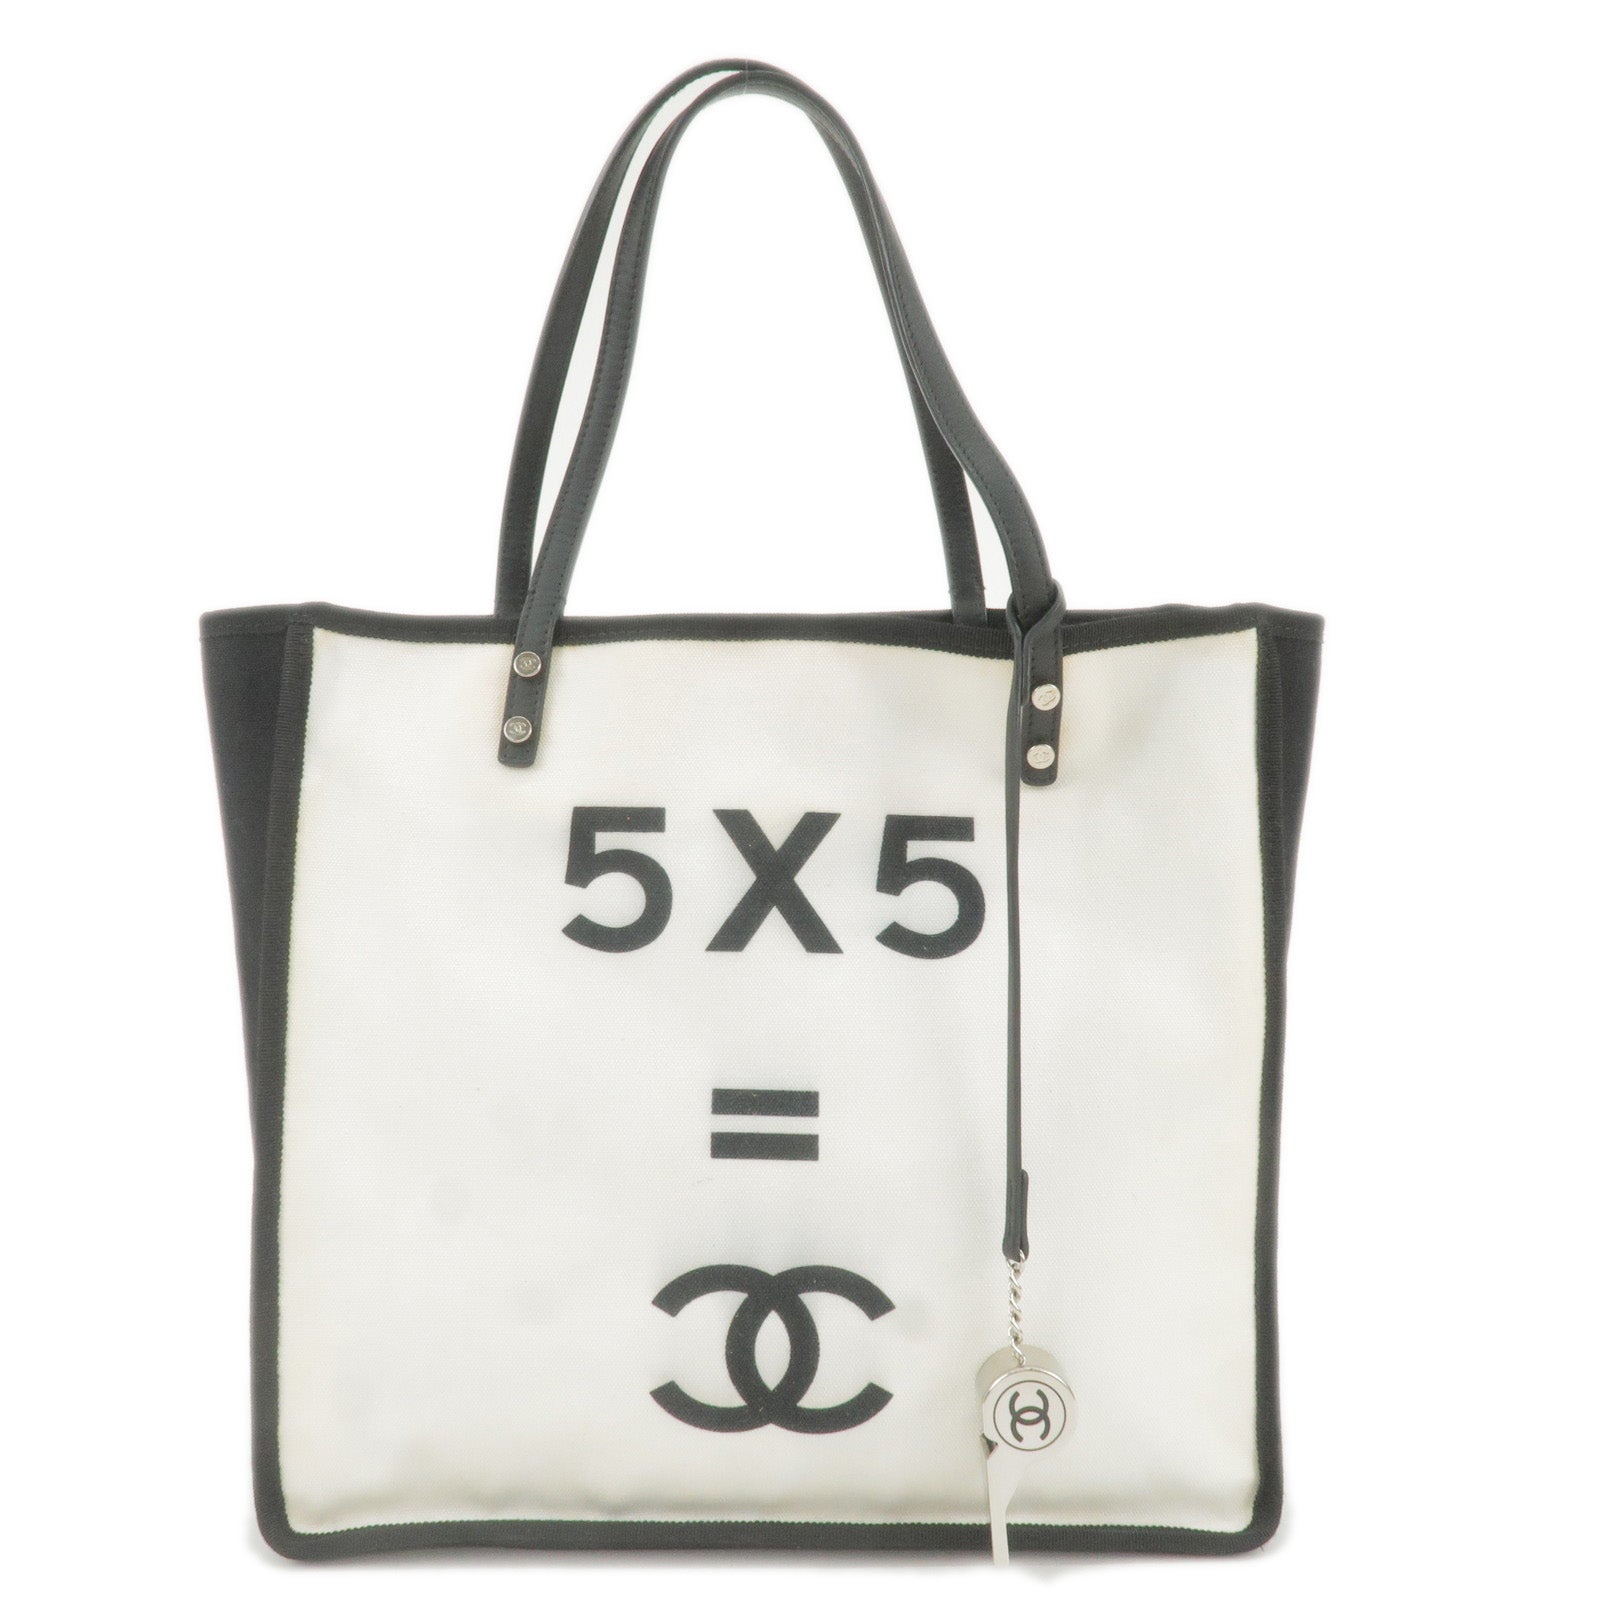 Chanel-Let's-Lemon-Straight-Canvas-Leather-Tote-Bag-A92884